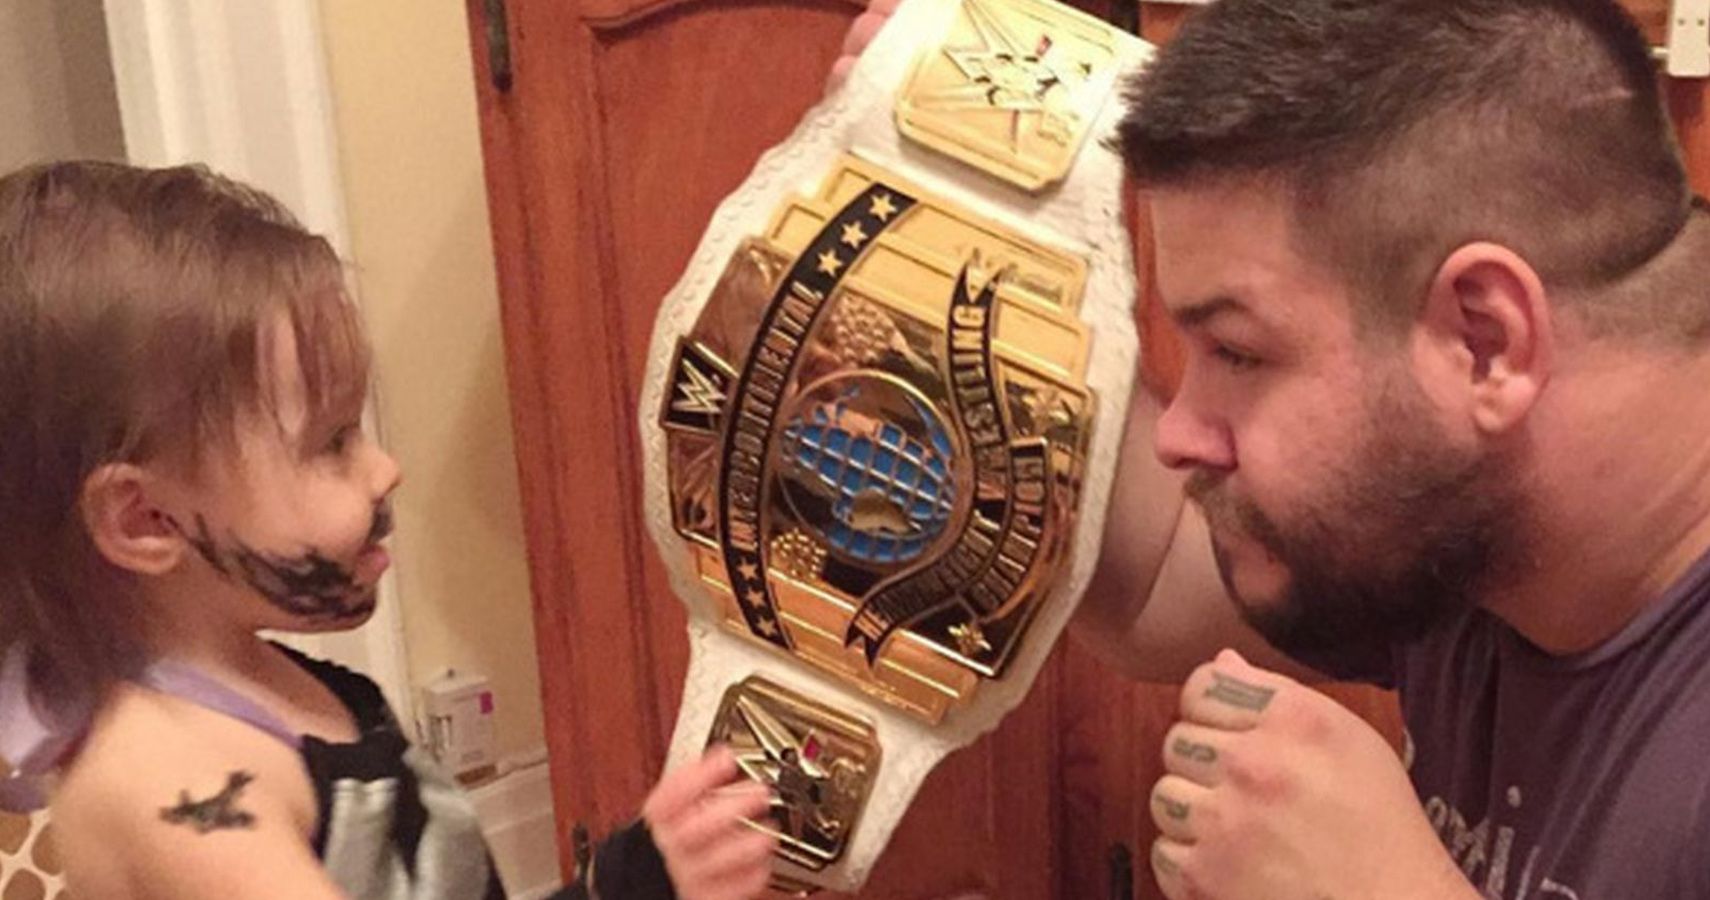 Merchandise: Why a Kevin Steen fan is finally excited for Kevin